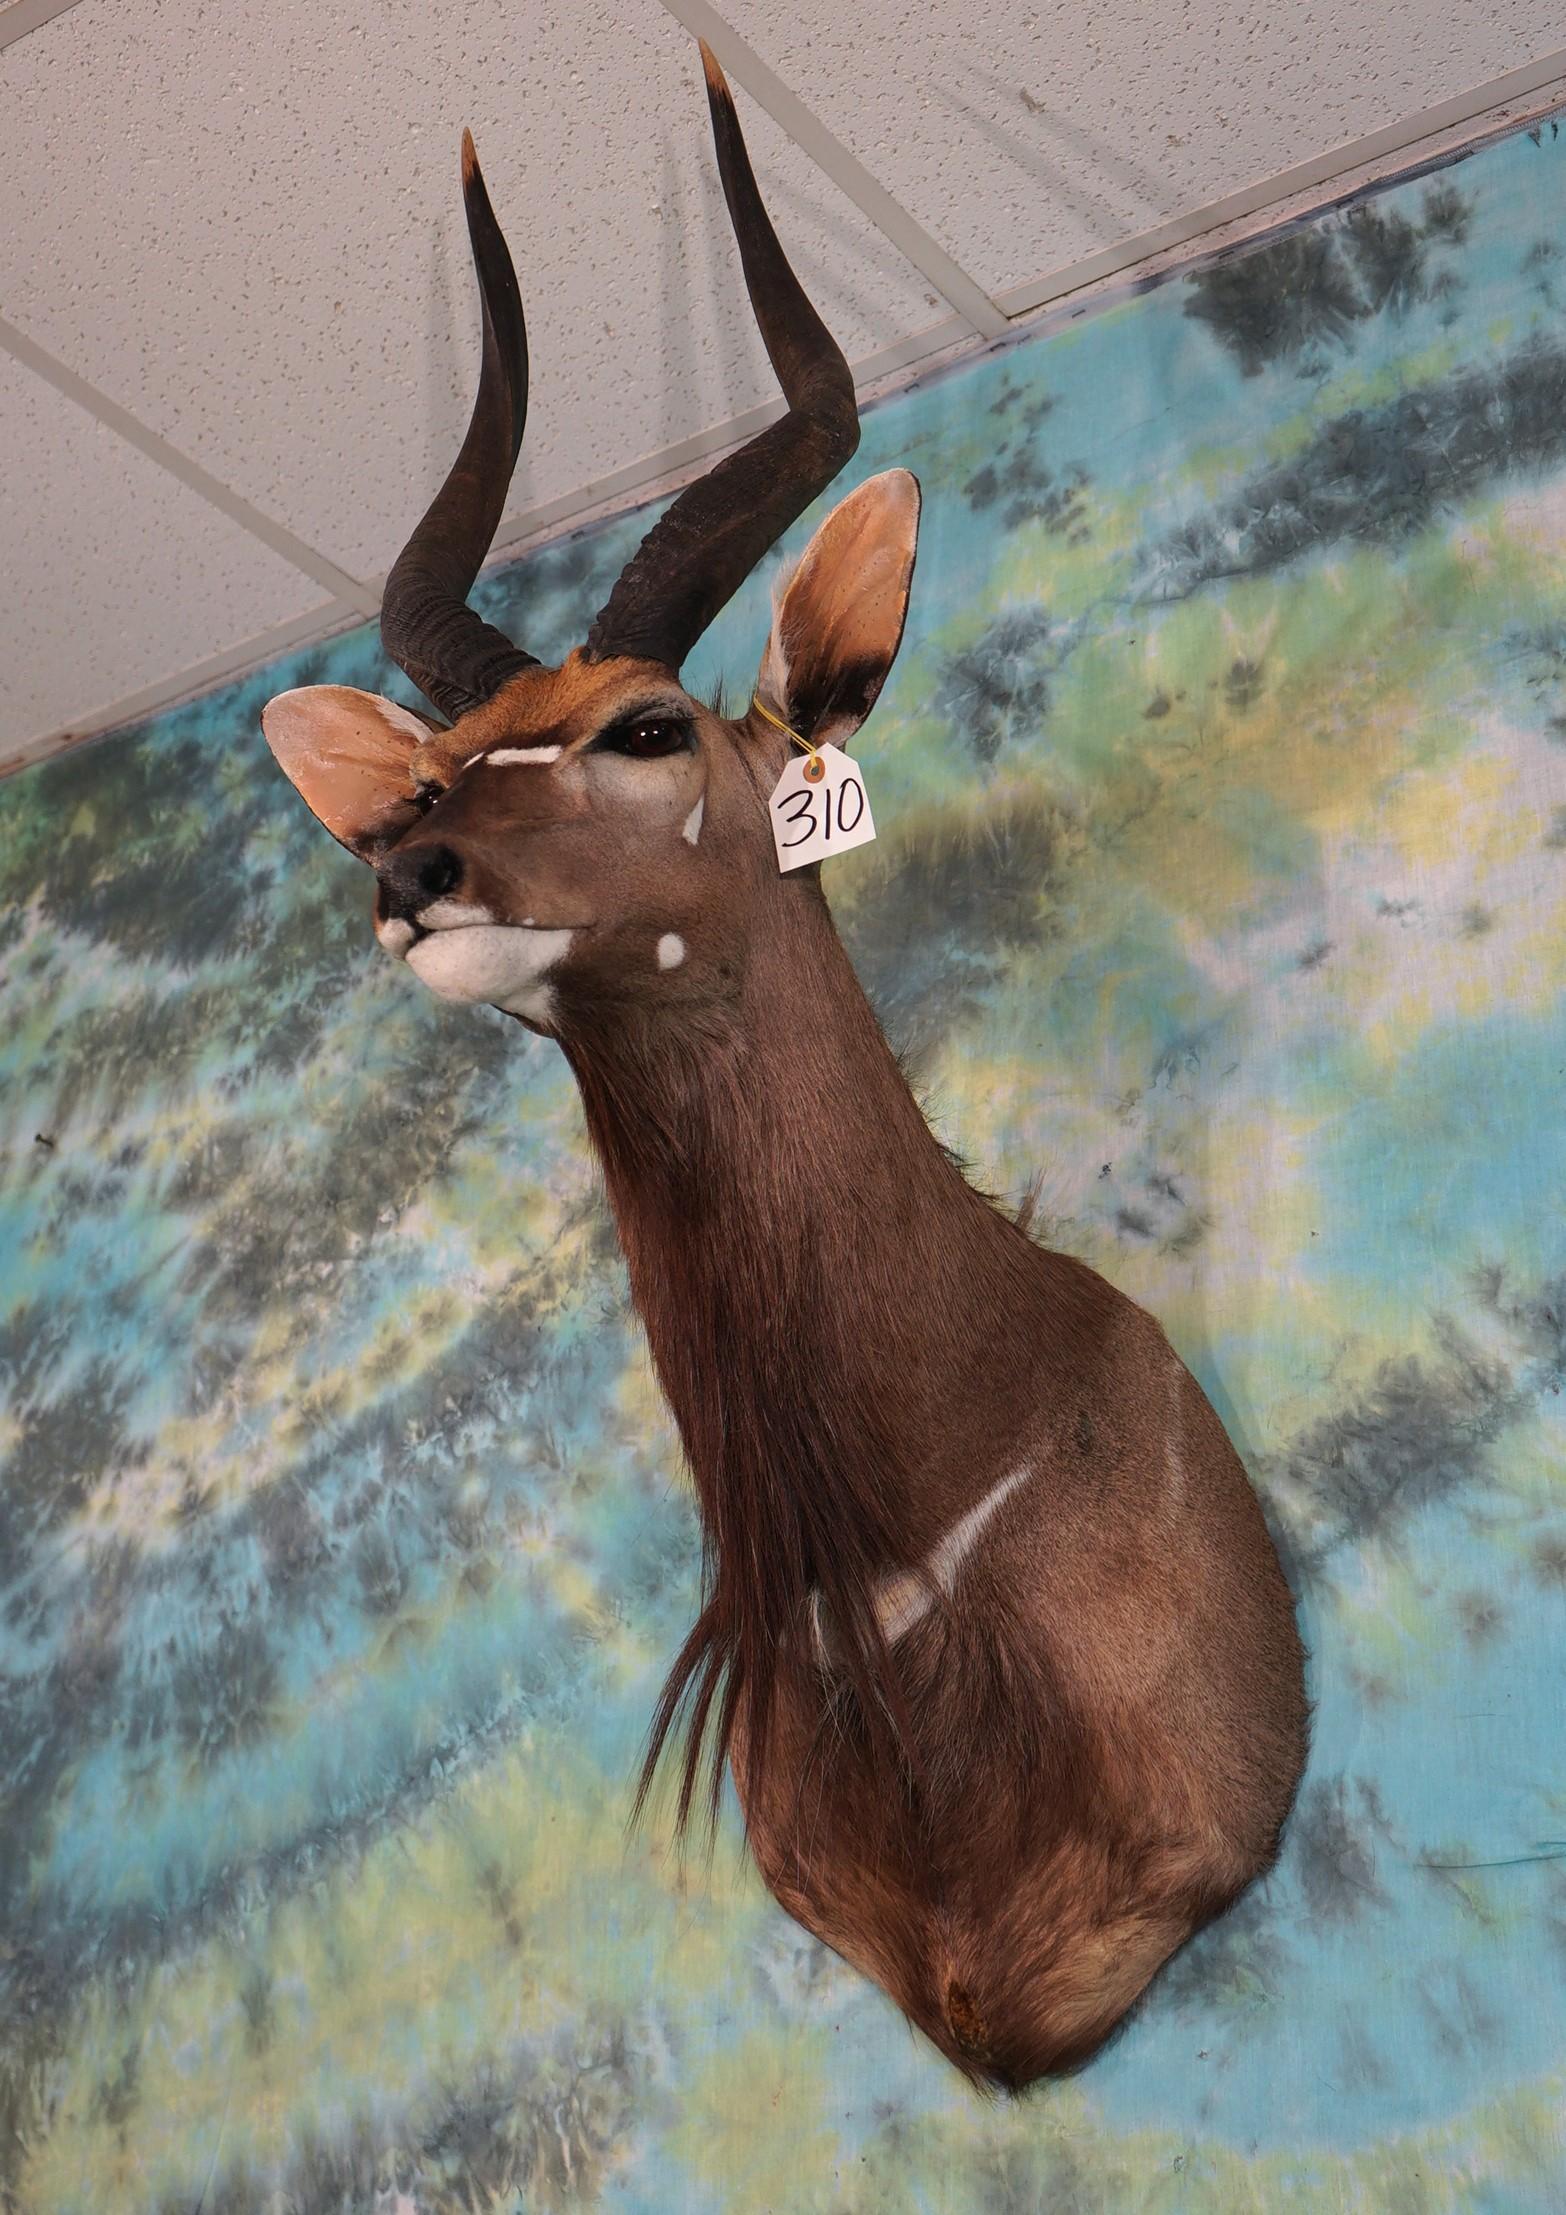 African Southern Nyala Shoulder Taxidermy Mount